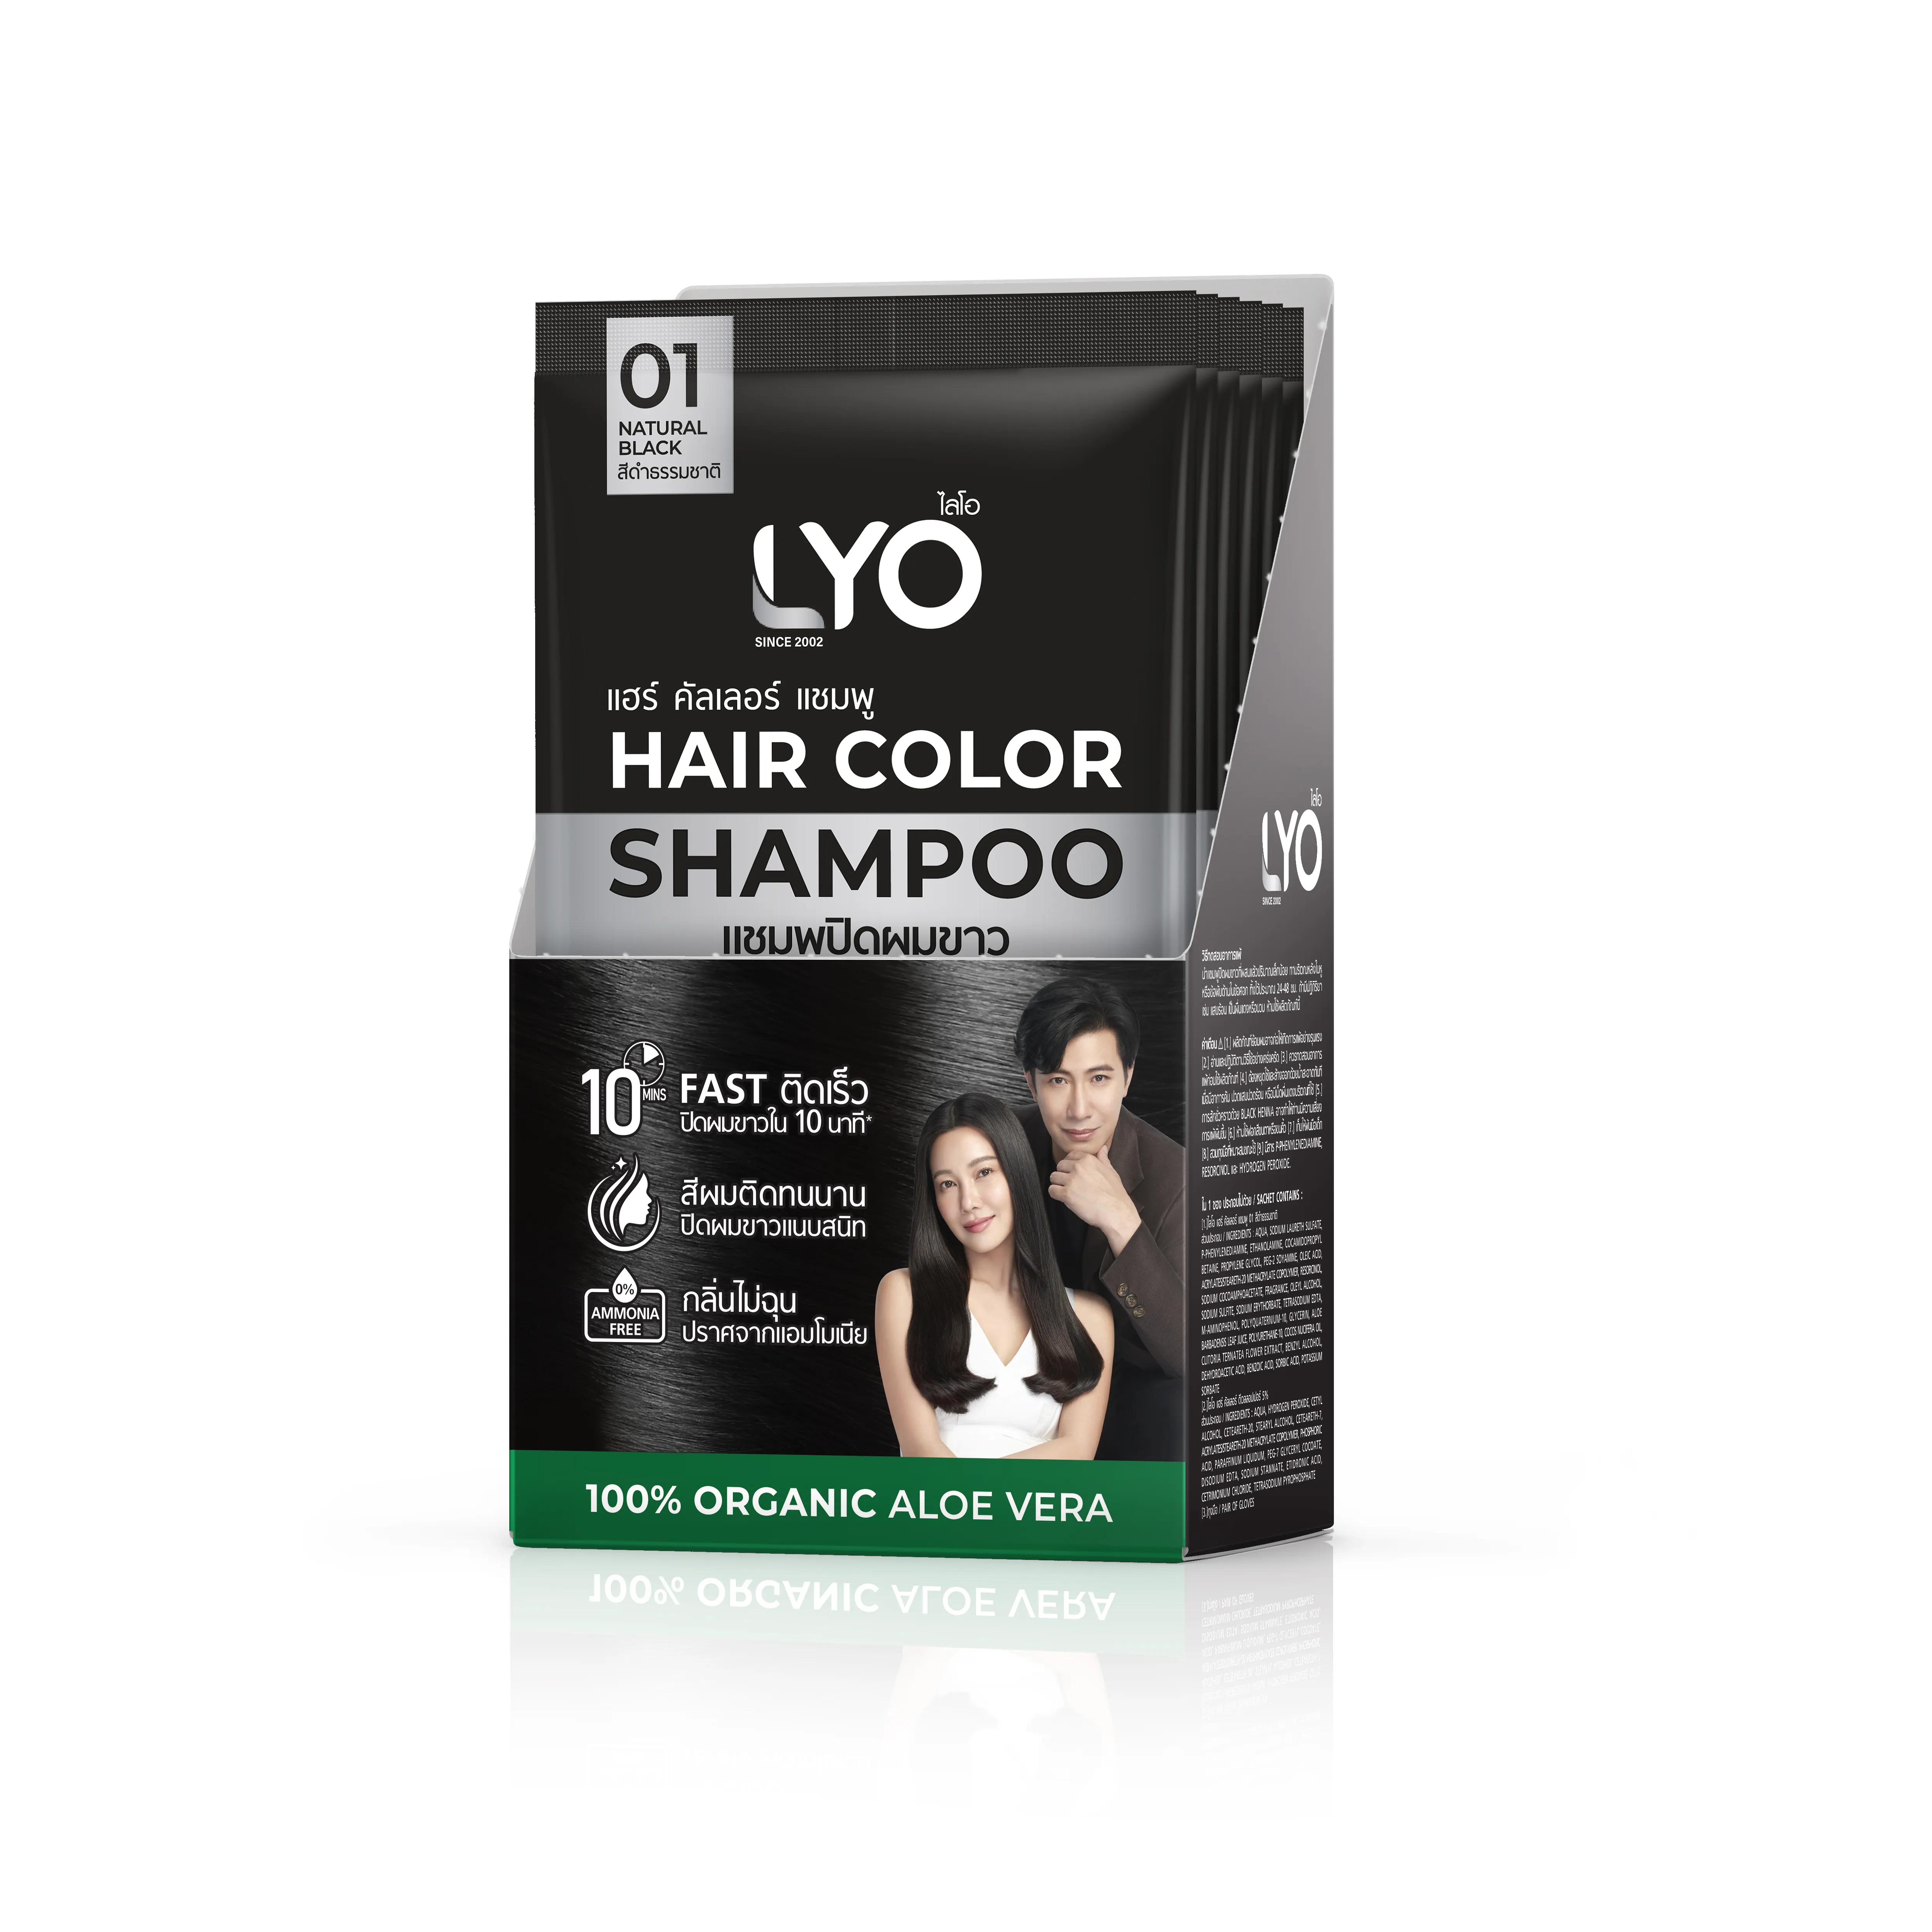 Premuim Herbal Extract Hair Styling Hair Color Shampoo by LYO Brand 01NATURAL BLACK for Hair Growth Ammonia Free and Argan oil